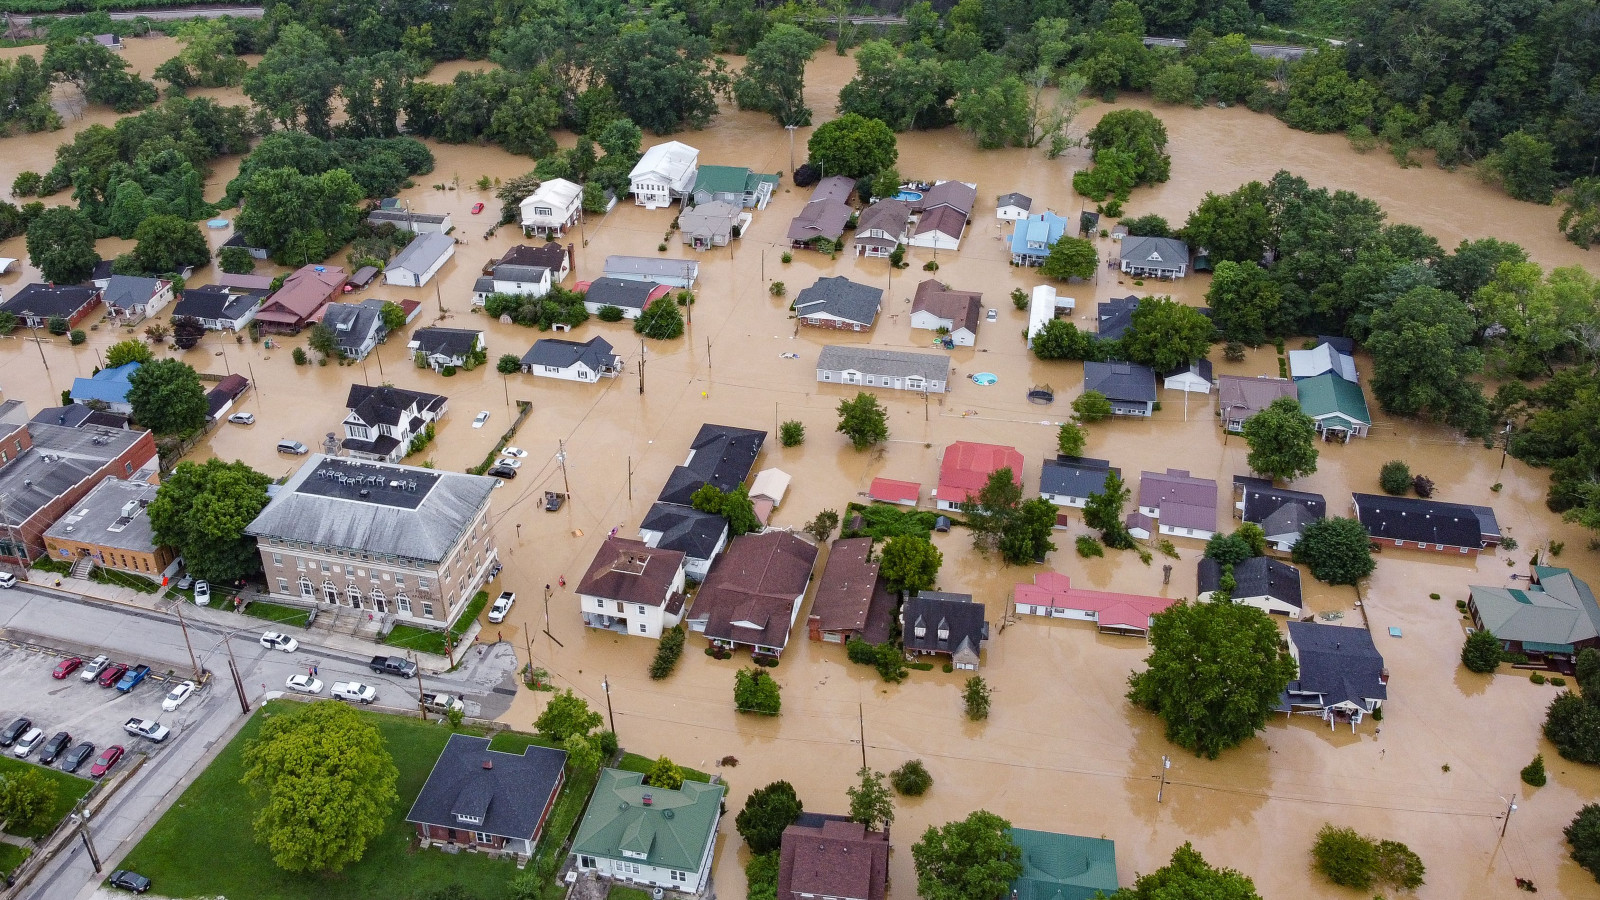 Aerial view of homes submerged under floodwaters from the North Fork of the Kentucky River in Jackson, Kentucky, July 28, 2022. - Flooding caused by torrential rains has killed at least eight people in eastern Kentucky and left several residents stranded on roofs and in trees, the governor of the south-central US state said Thursday.